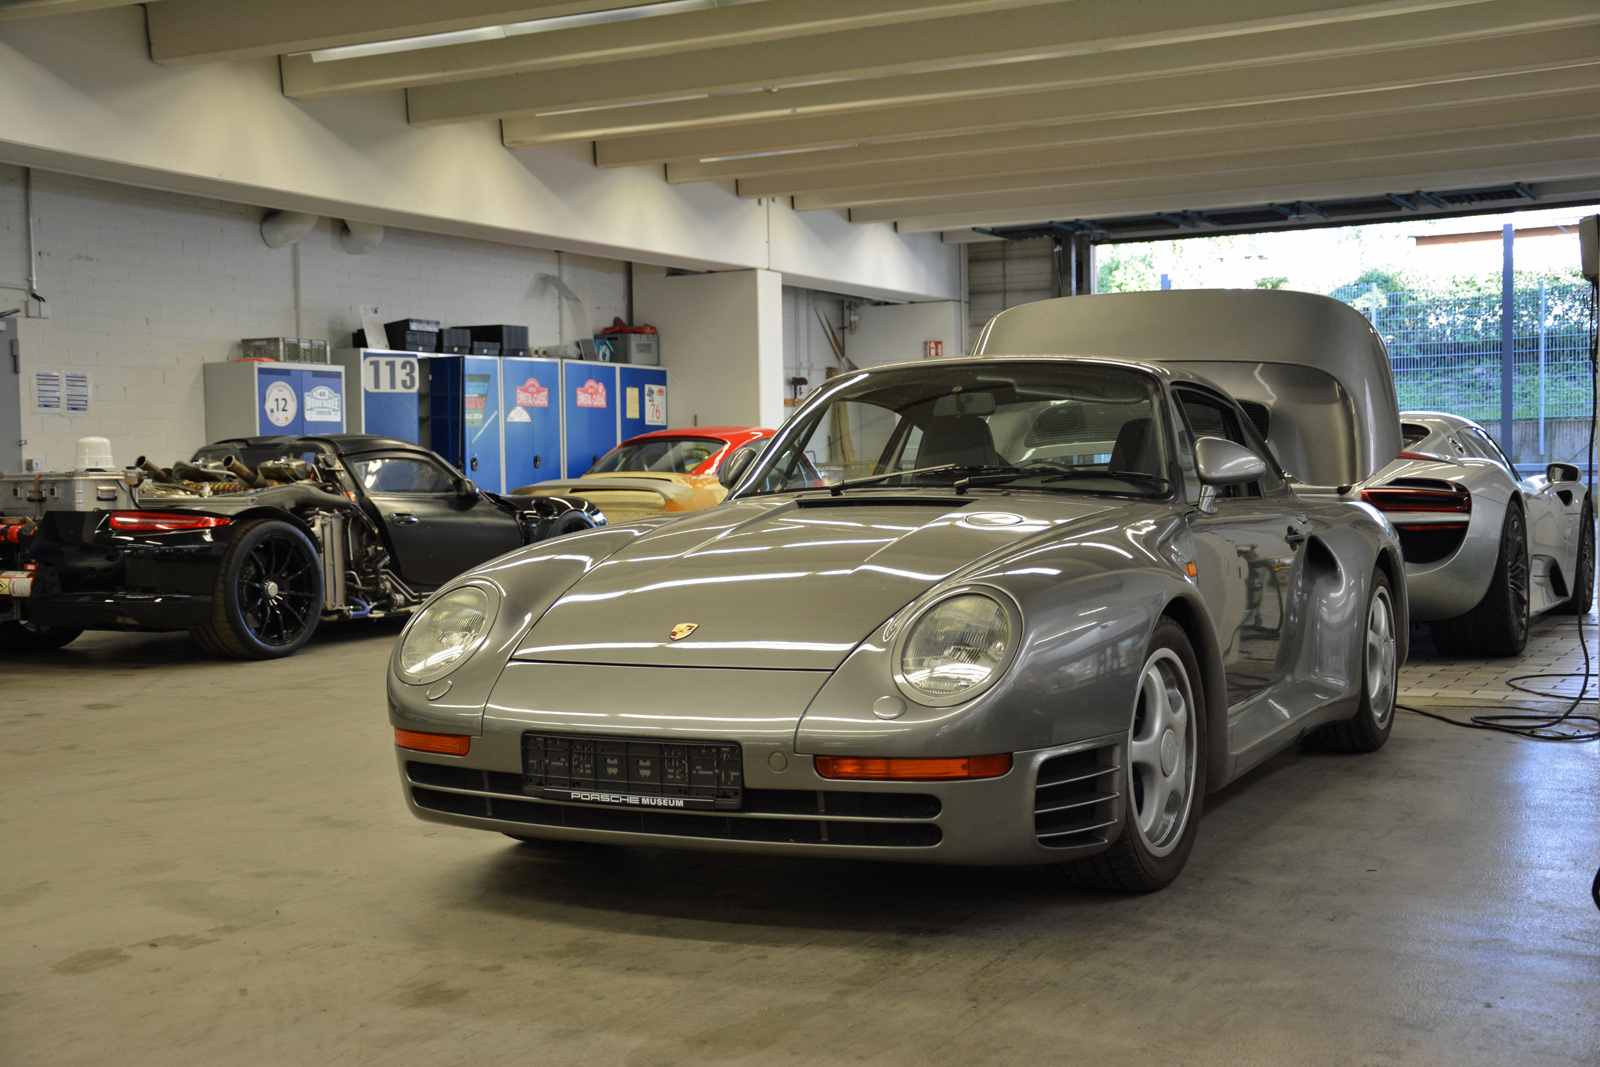 <p>Porsche initially turned the 959 concept into a production model with a single mission in mind: to dominate Group B racing. One of the best performance cars of its era, the 959 received a twin-turbocharged 2.8-liter flat-six engine which channeled its <strong>450 hp </strong>output to both axles.</p>